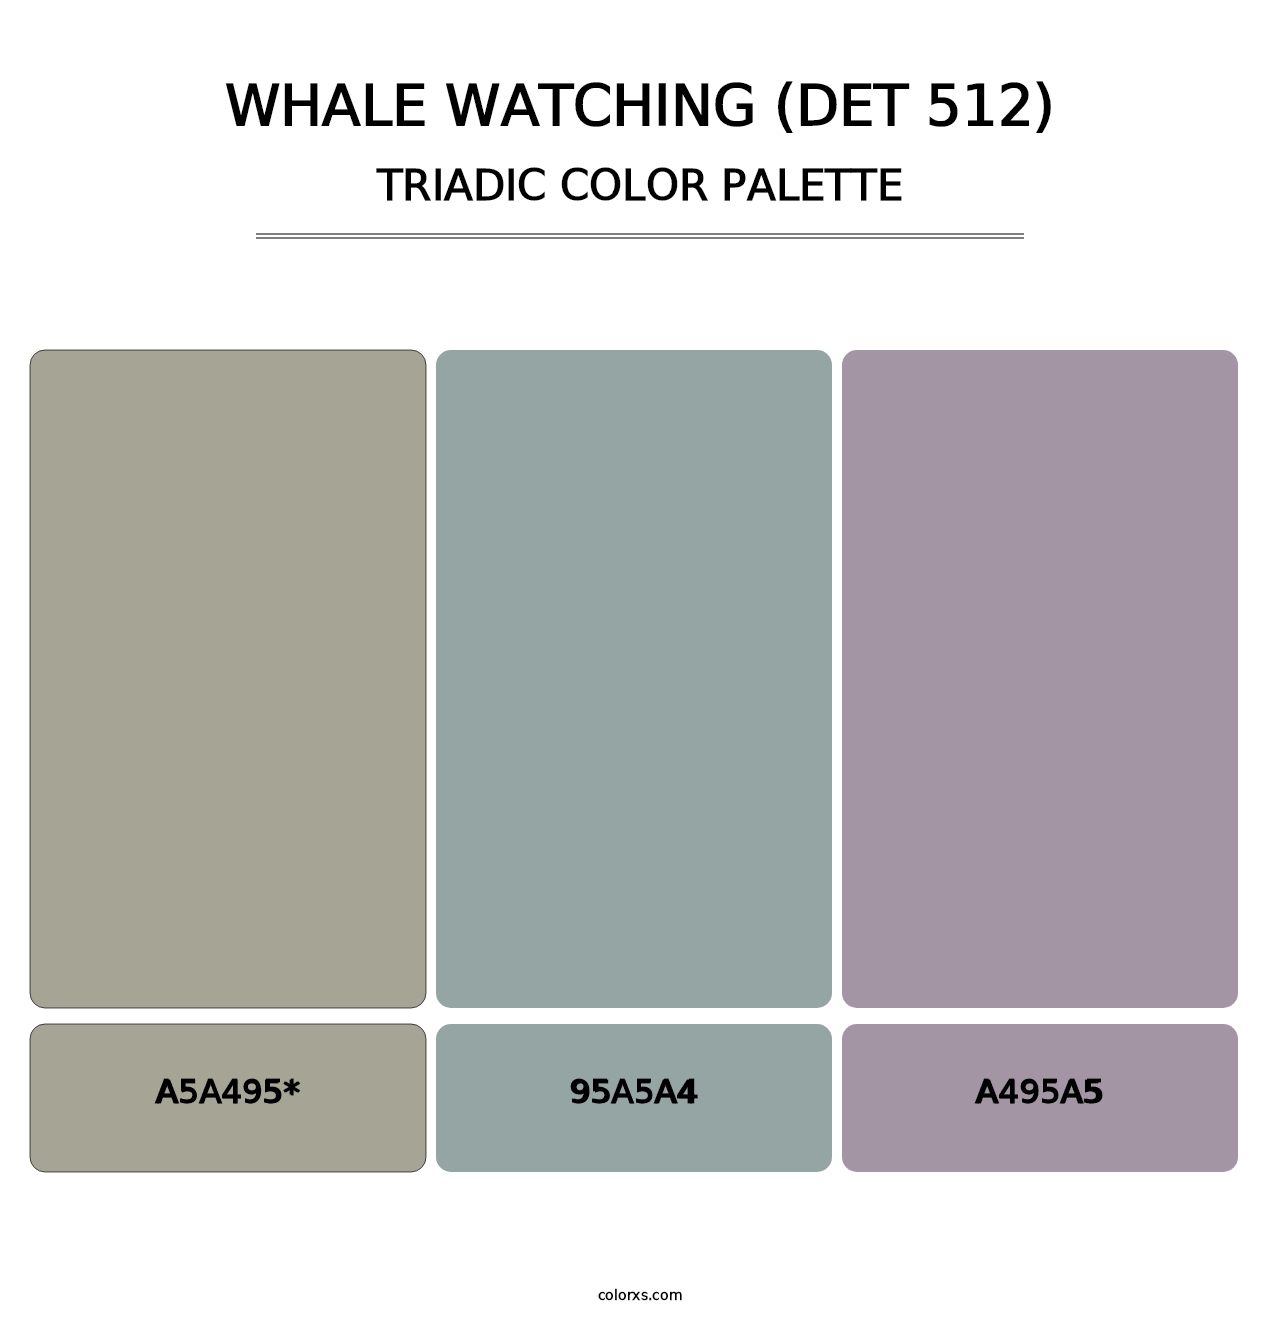 Whale Watching (DET 512) - Triadic Color Palette